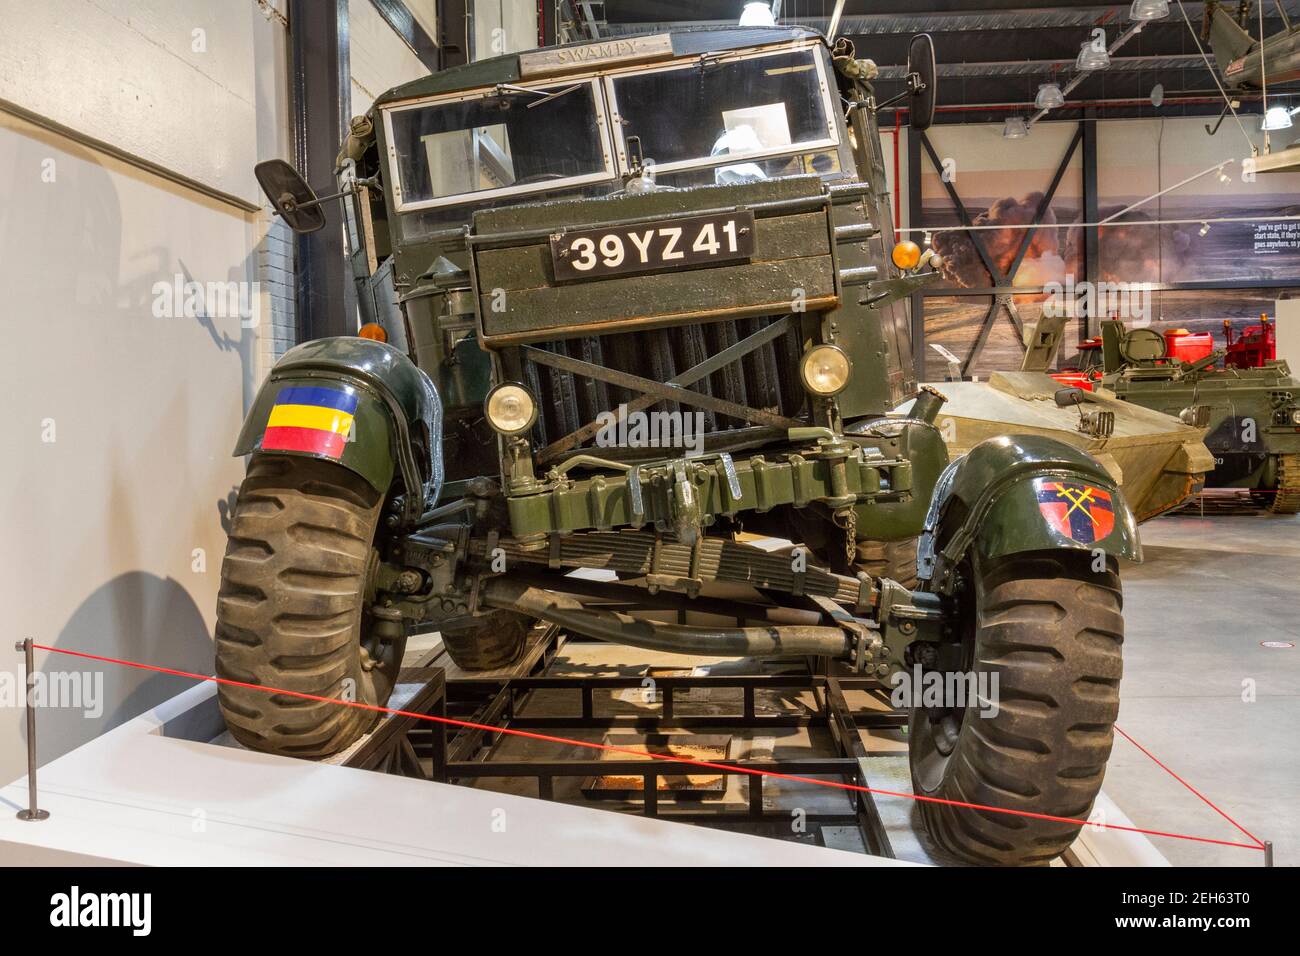 A Scammell Pioneer recovery vehicle in the REME Museum (Royal Electrical and Mechanical Engineers), Lyneham, Wiltshire, UK. Stock Photo